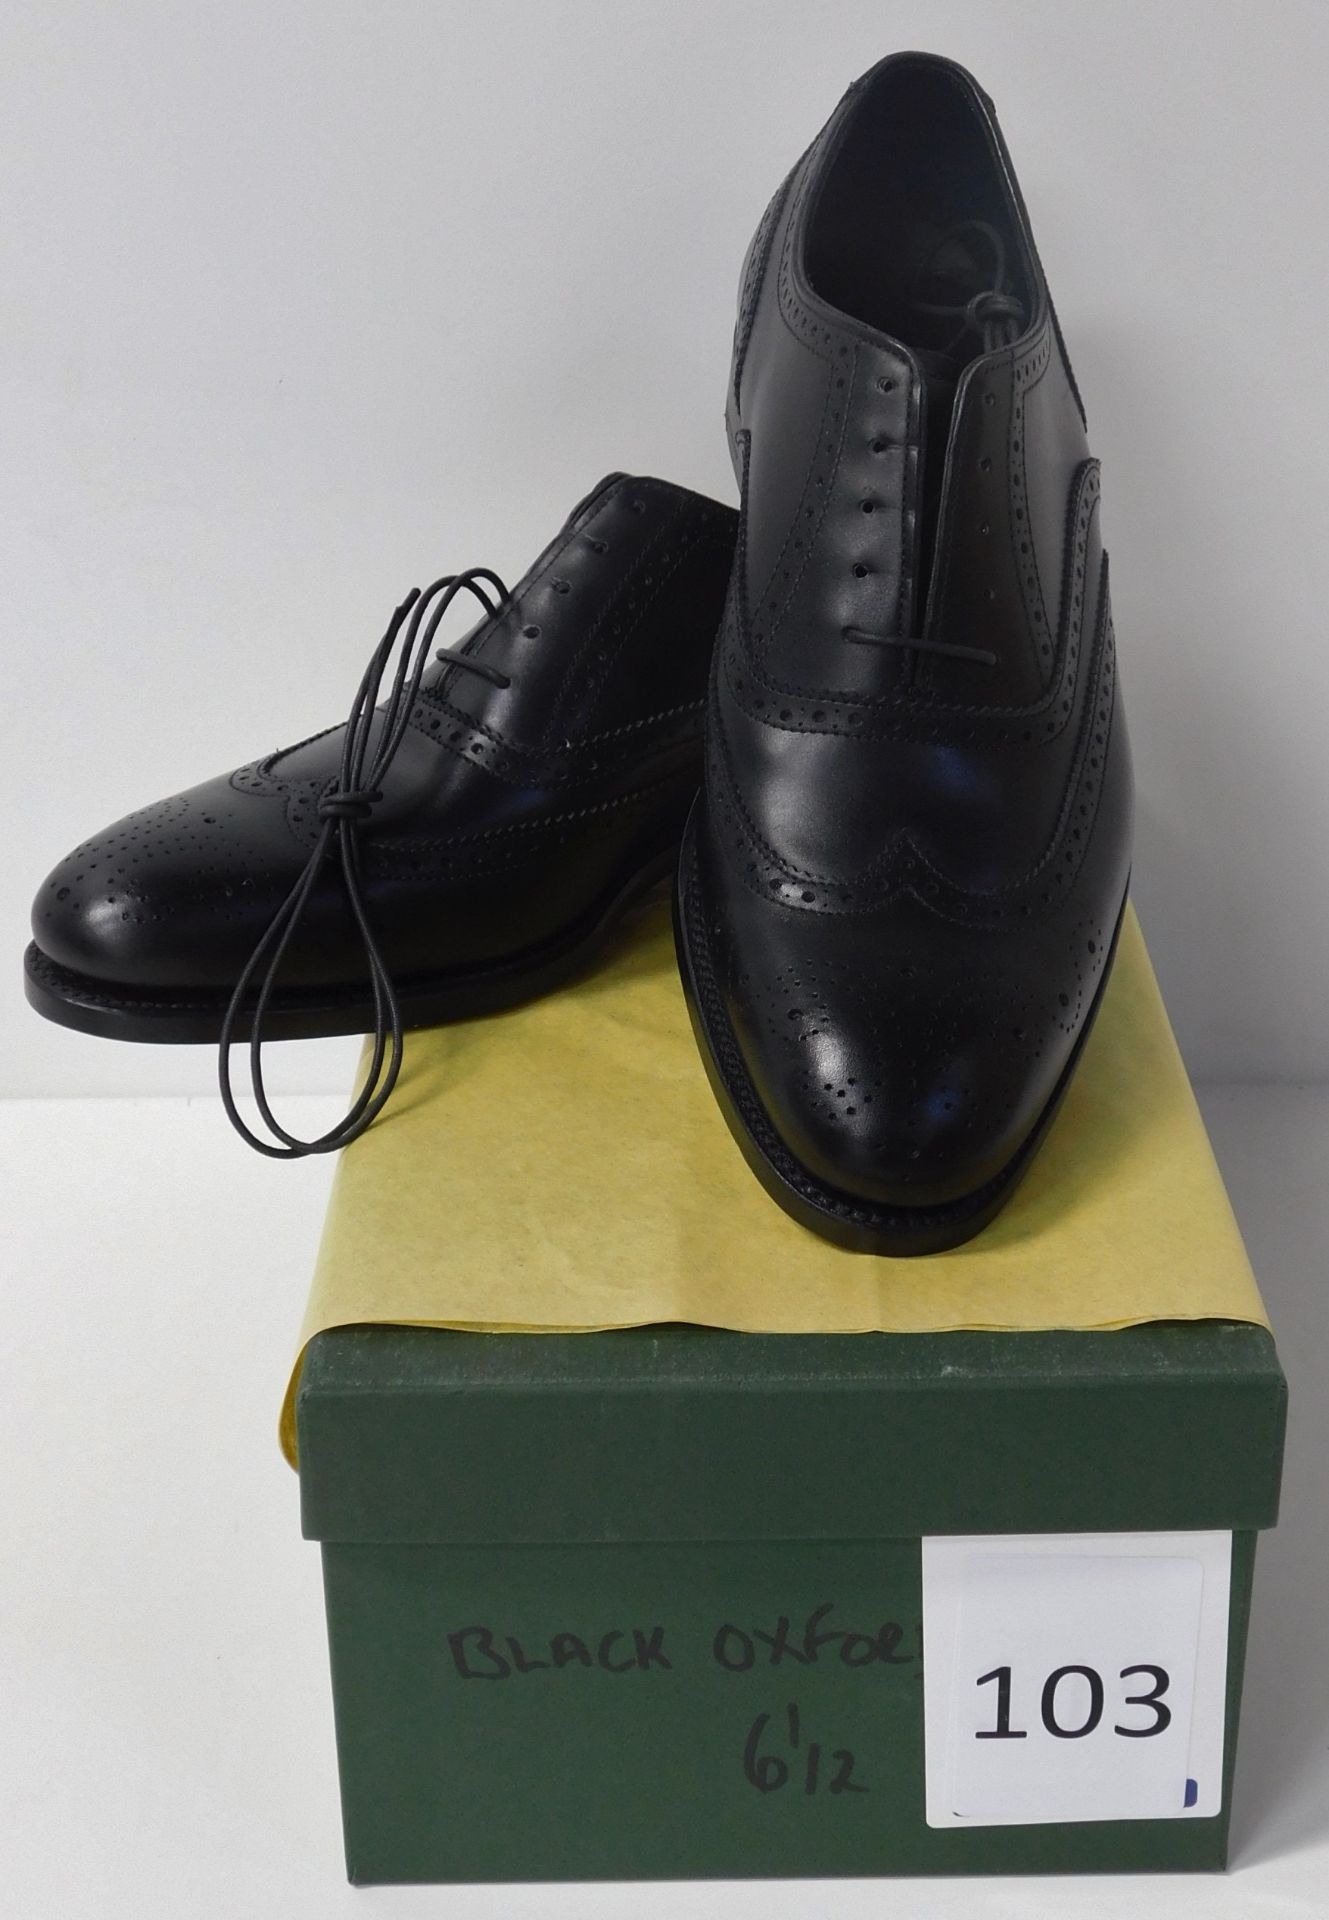 Pair of Alfred Sargent Black Oxford, Size 6.5 (Slight Seconds) (Location: Brentwood - See General